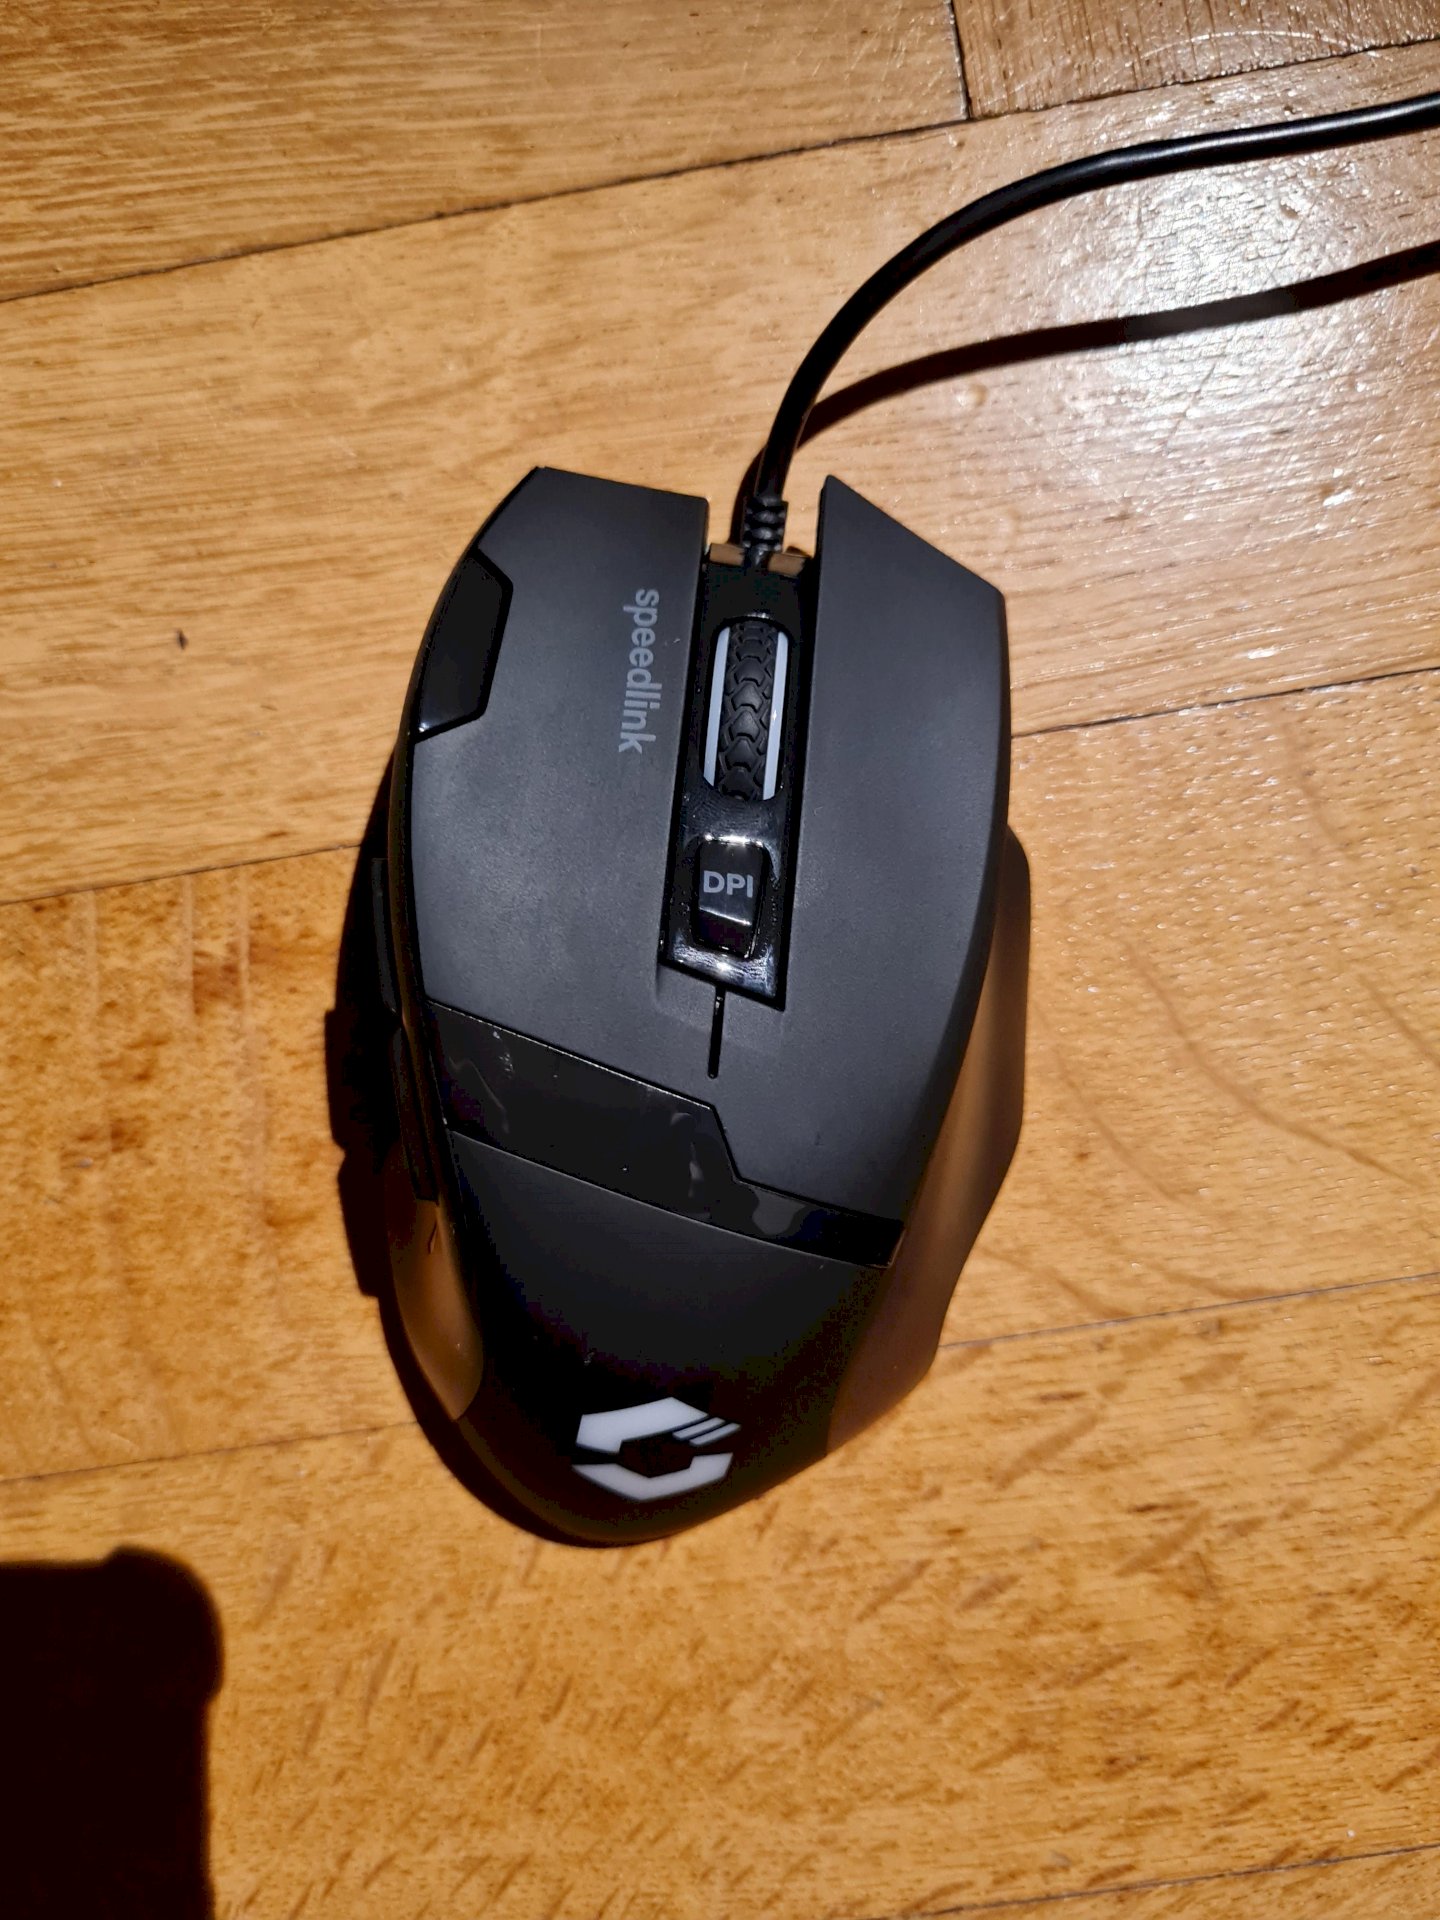 What do you think of this mouse